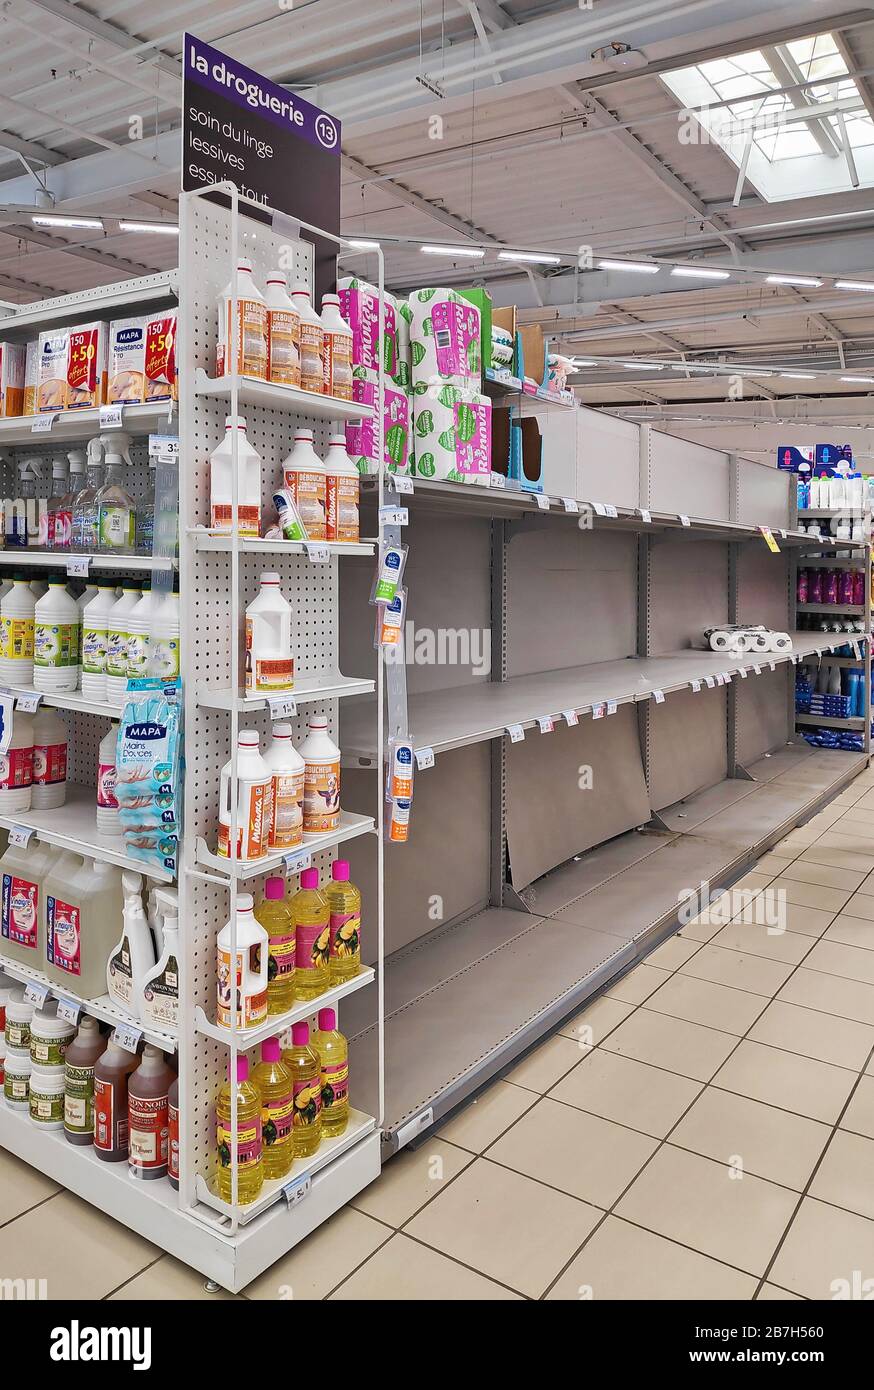 Paris, France - March 15 2020: Shelves of a supermarket normally filled with rolls of toilet paper completely because of Covid-19 pandemic. Stock Photo